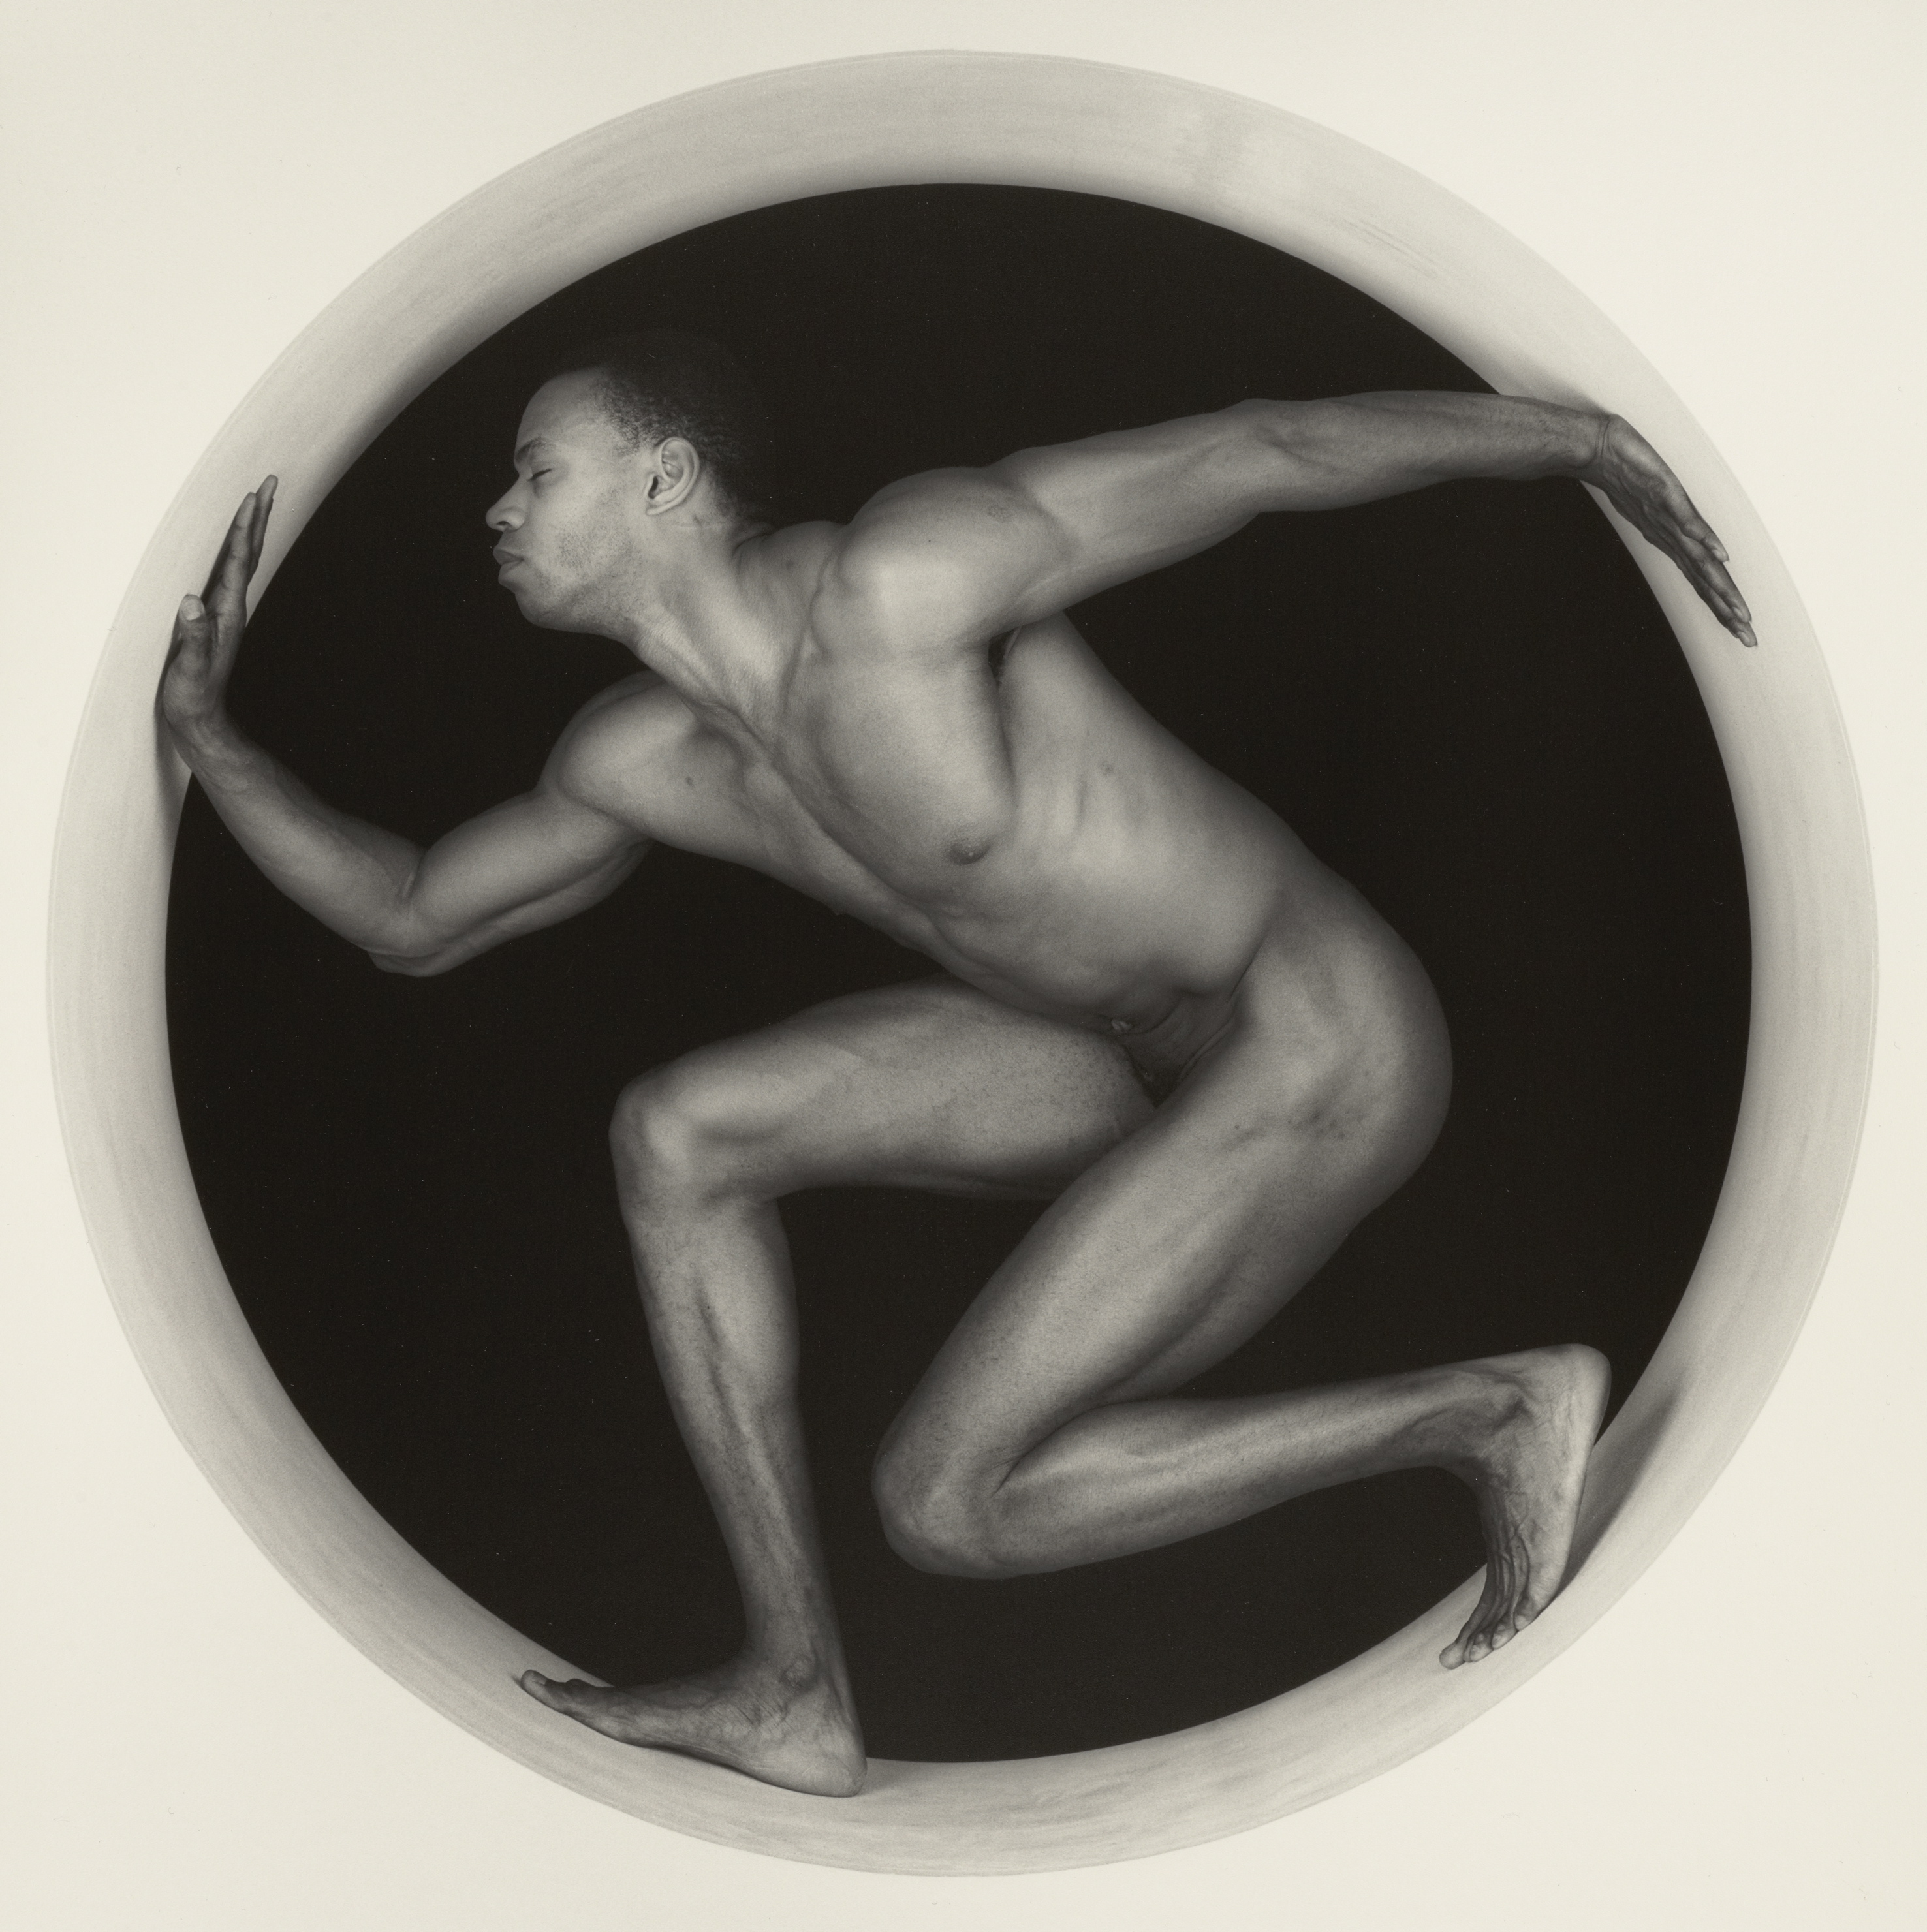 Black and white photograph a muscular nude man with eyes closed standing within a structure with a circular cut out.